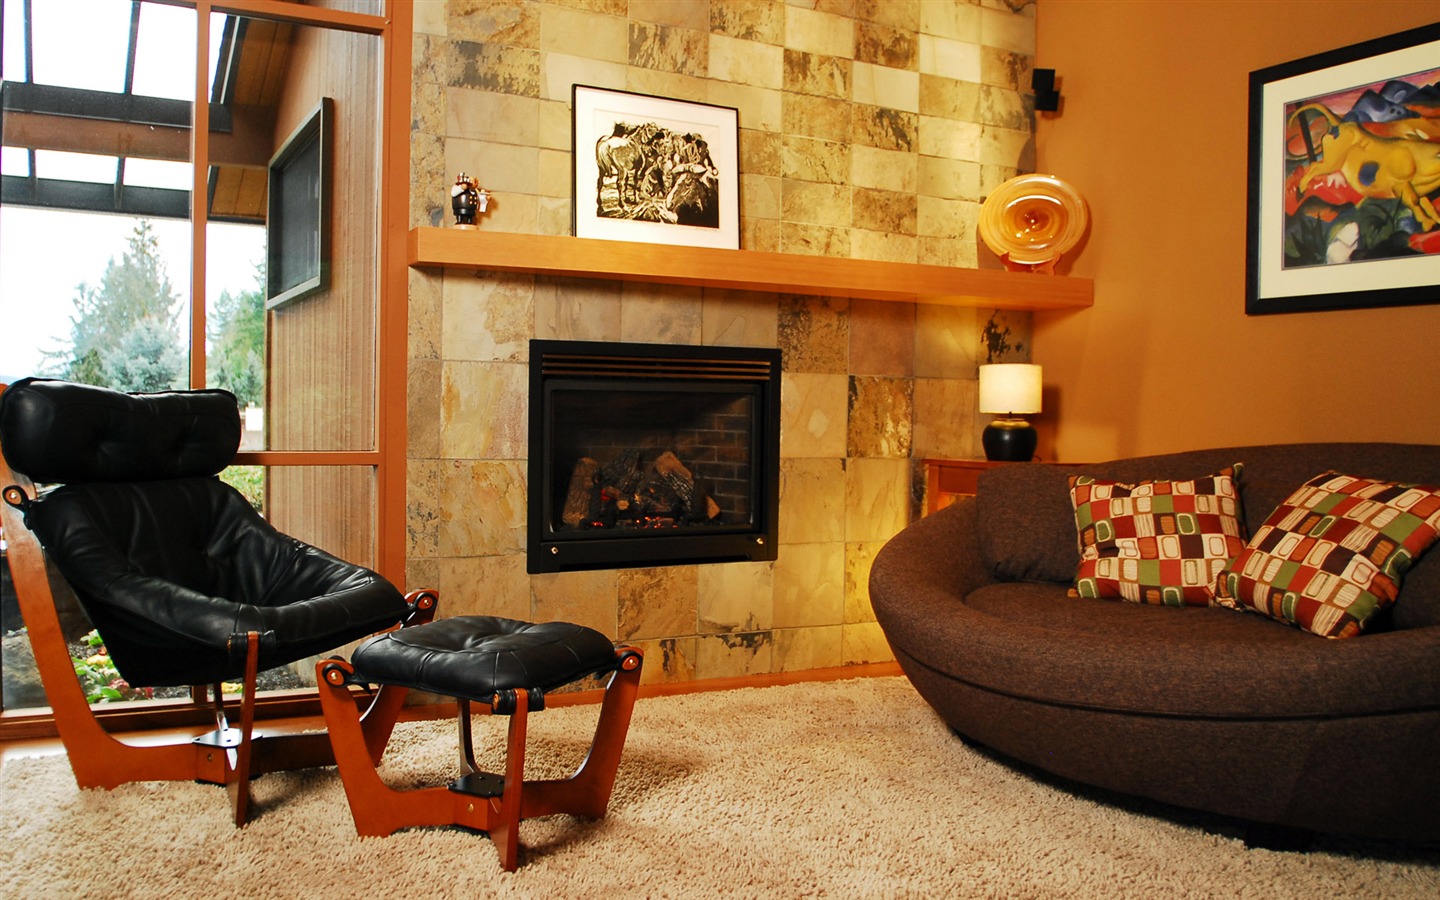 Western-style family fireplace wallpaper (1) #18 - 1440x900